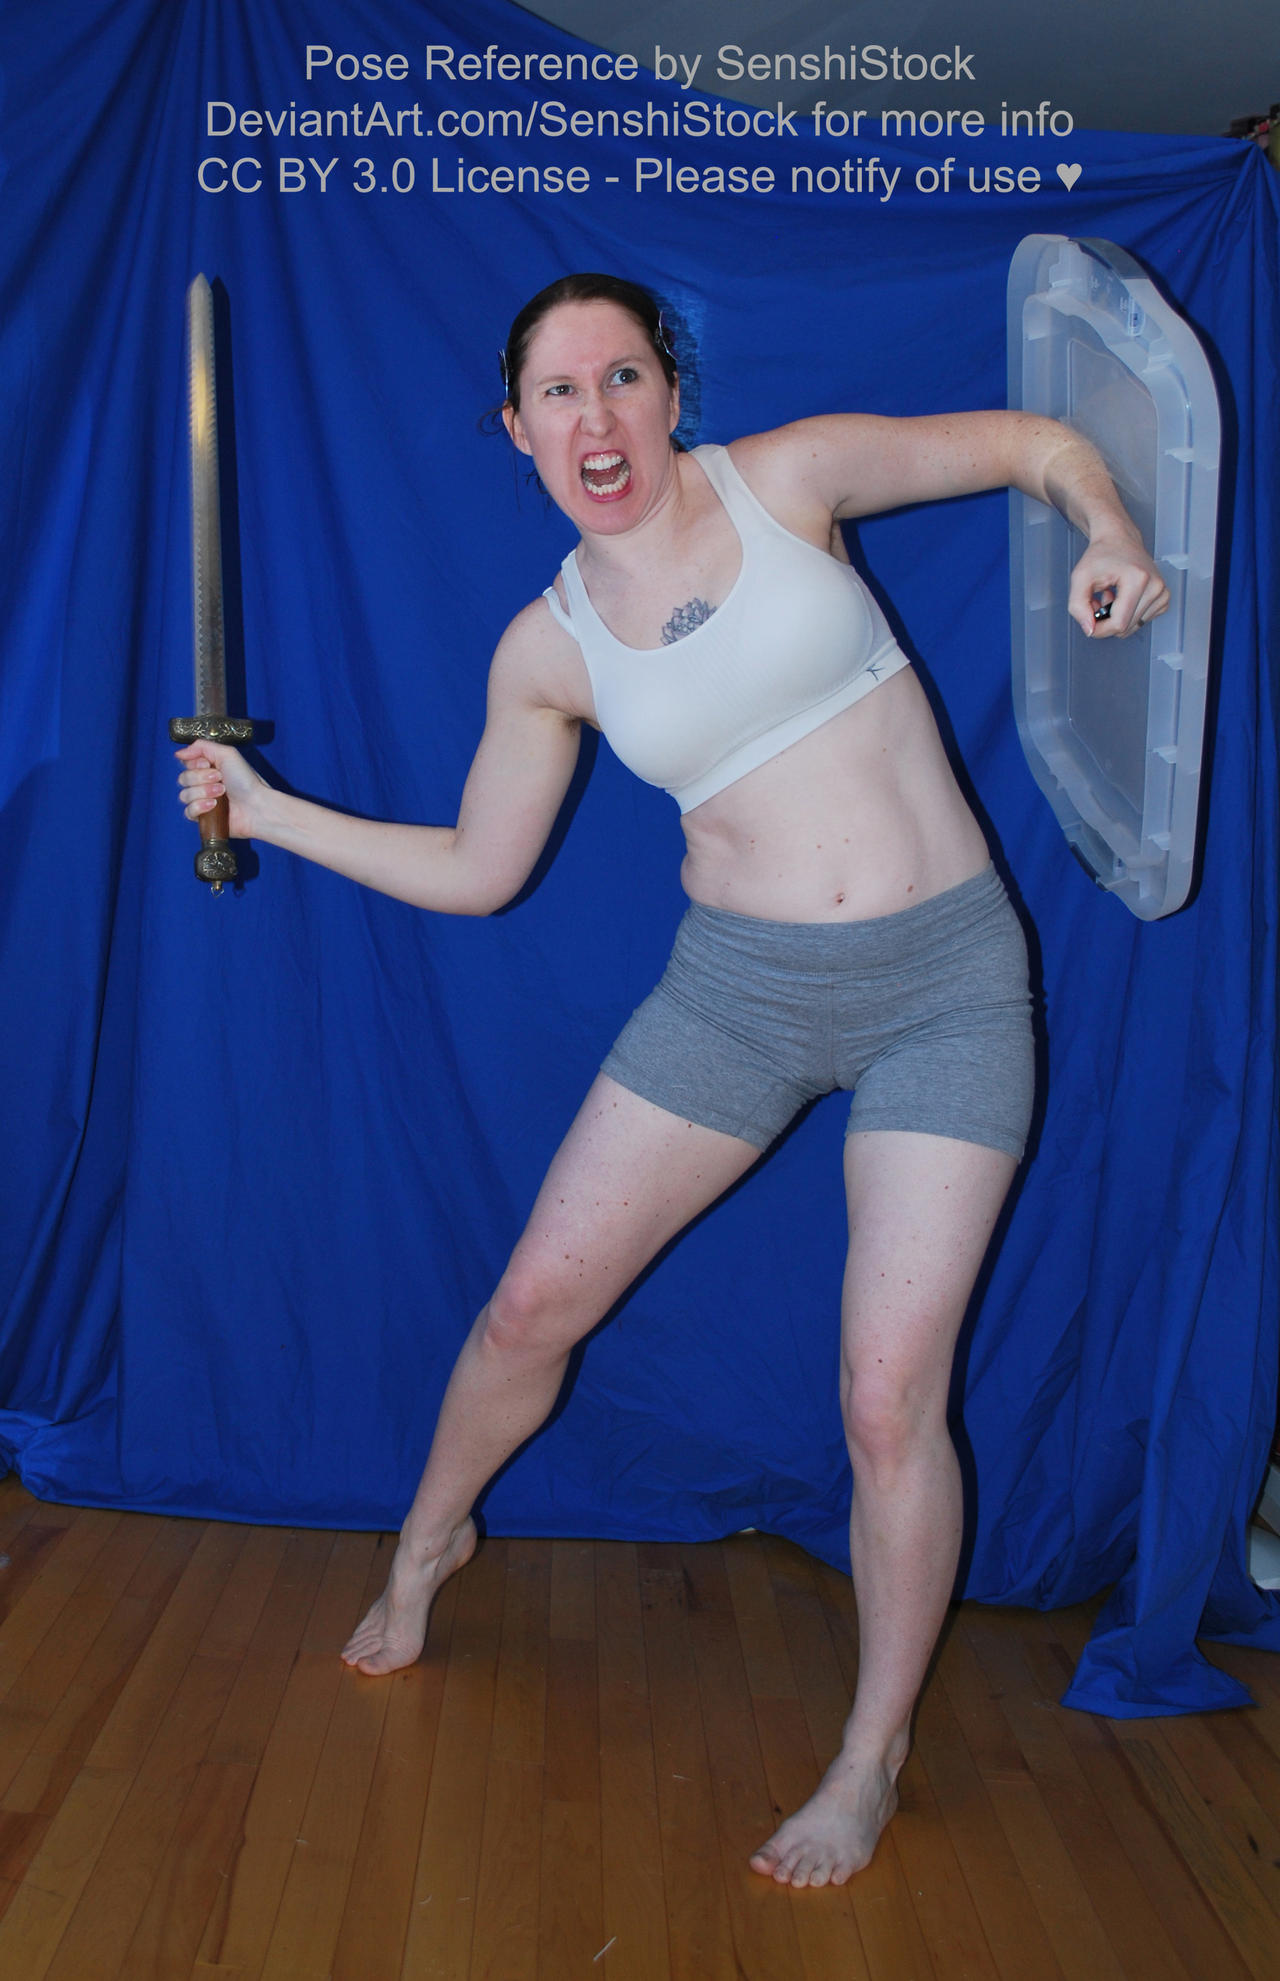 Featured image of post Reference Female Anime Sword Poses / X148 high resolution self portraits shot in a studio using a soft box for lighting, all standing poses with different angles and perspective holding a sword.